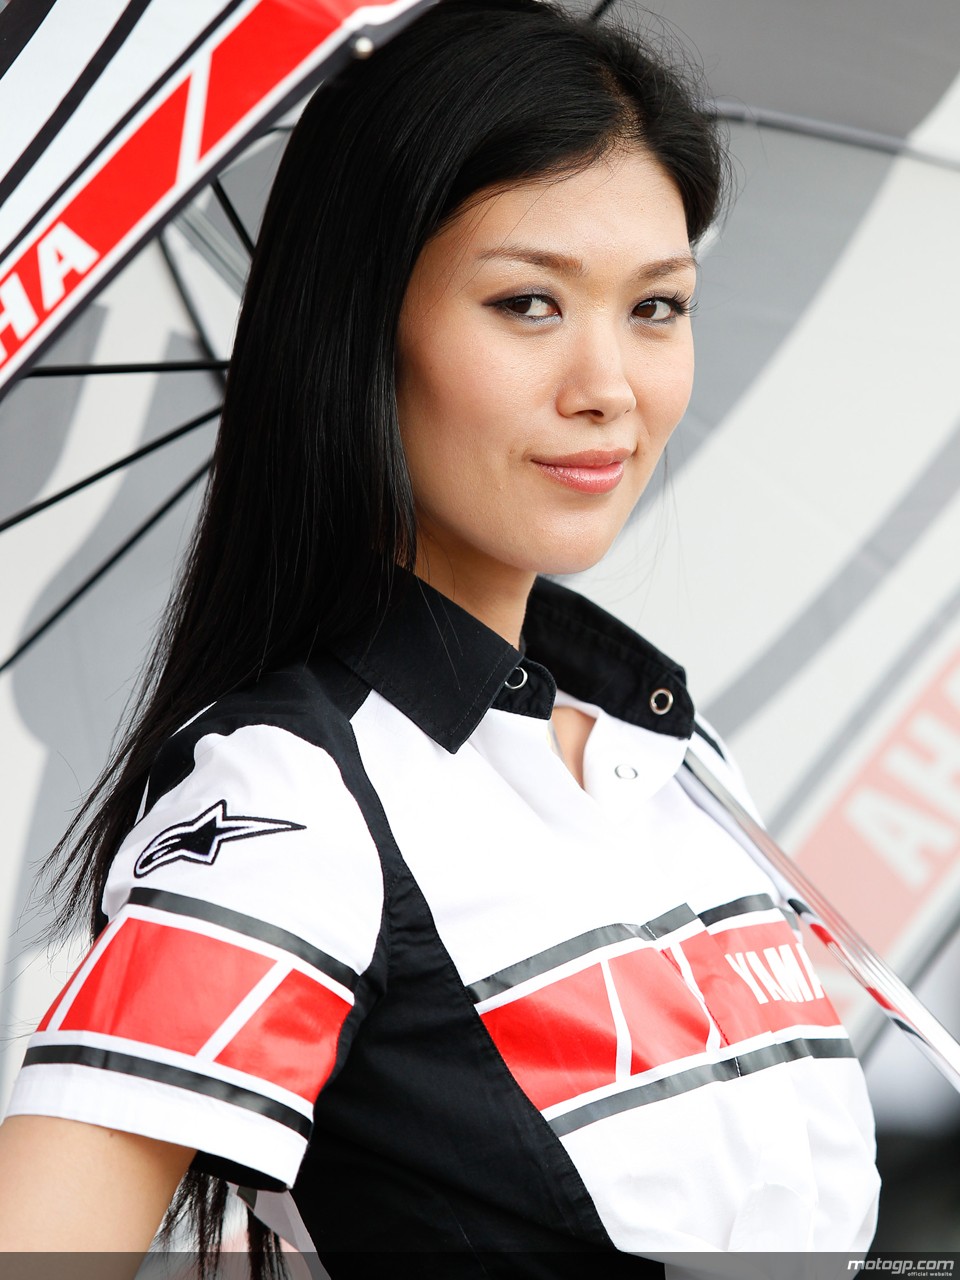 Pictures of Paddock Girls for Moto GP - Japan (1) ~ Just A 